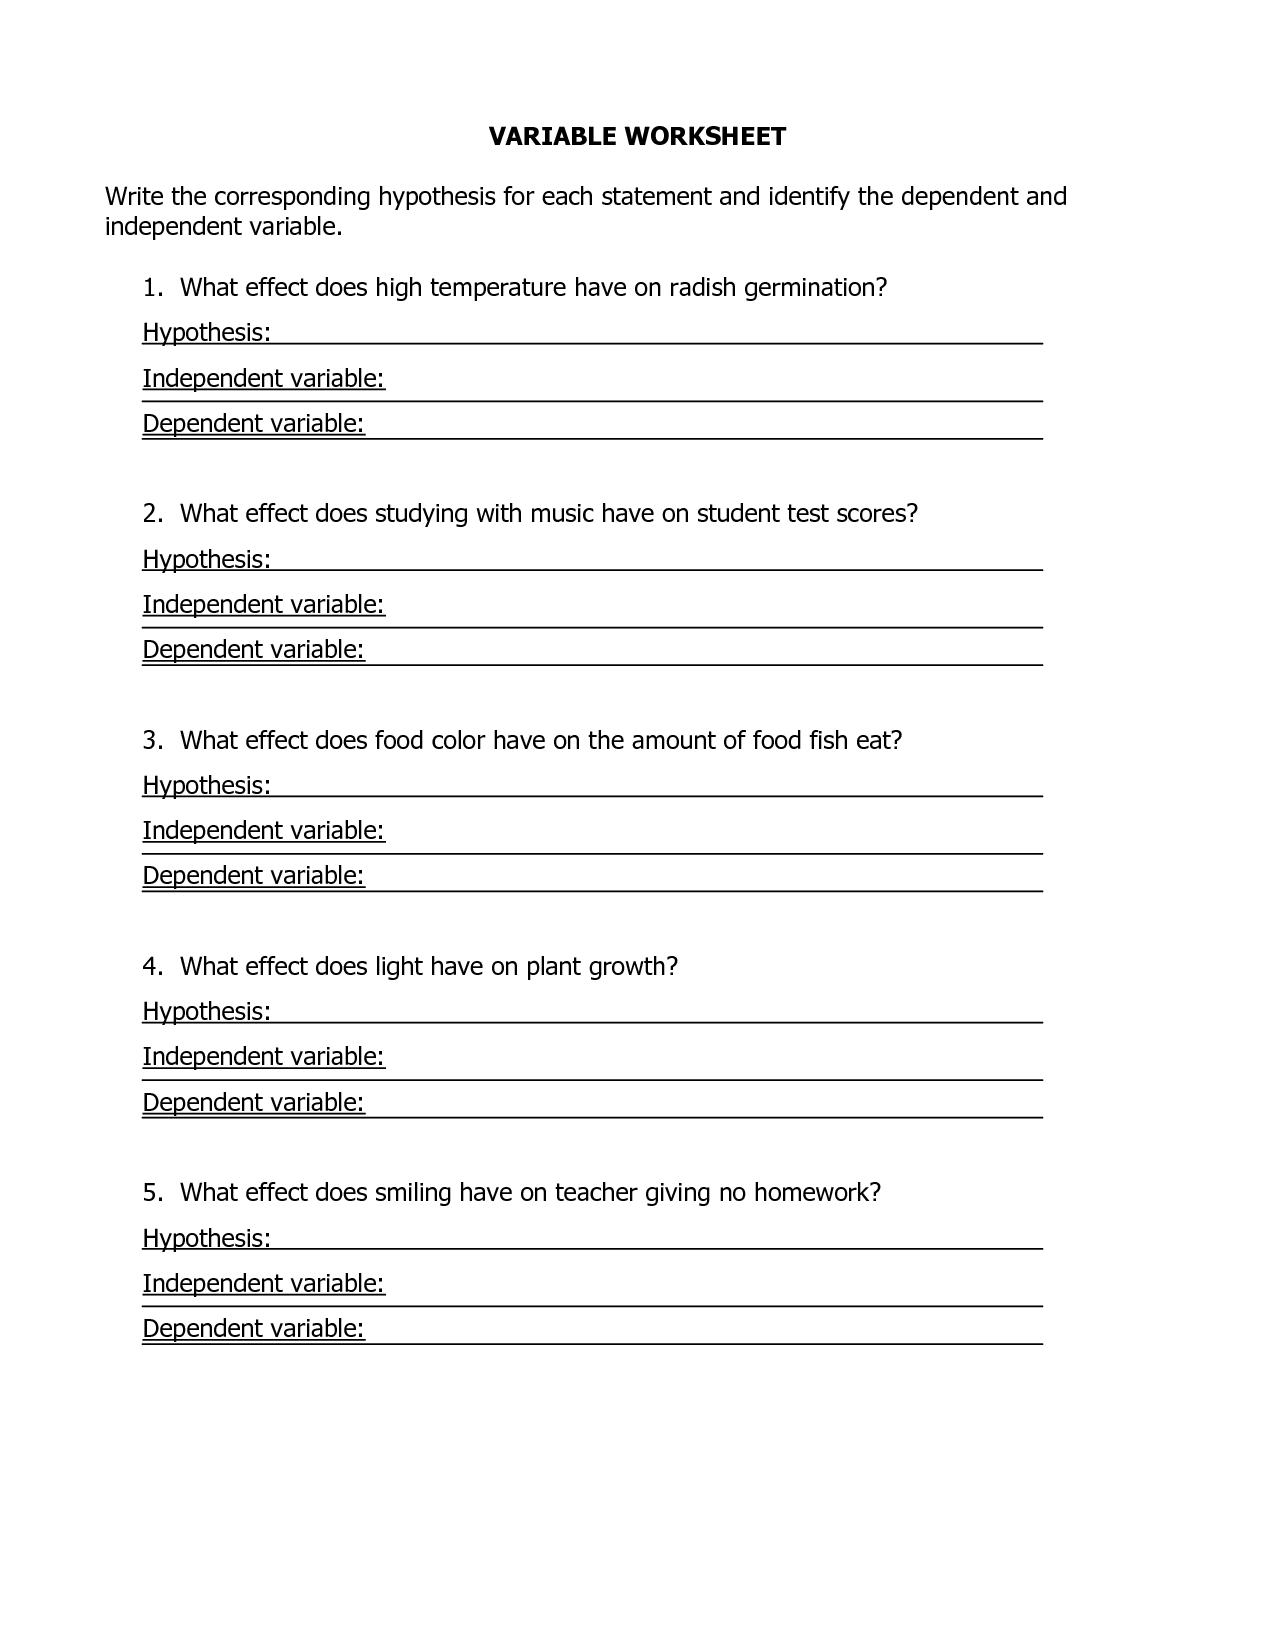 16 Best Images of Simpson Science Variable Worksheet Answer - Controls